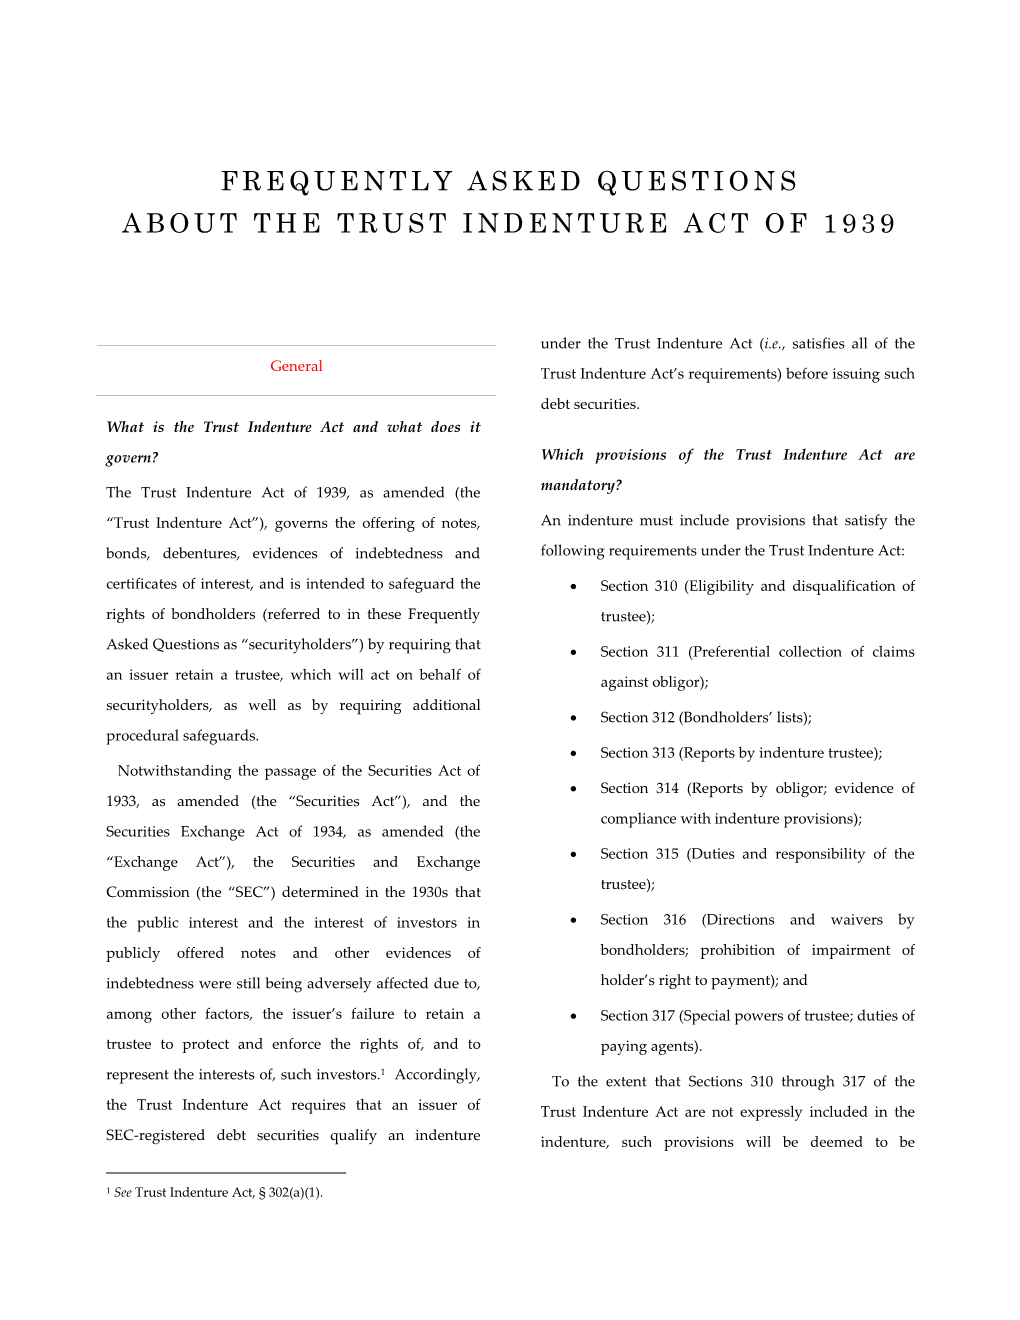 Frequently Asked Questions About the Trust Indenture Act of 1939